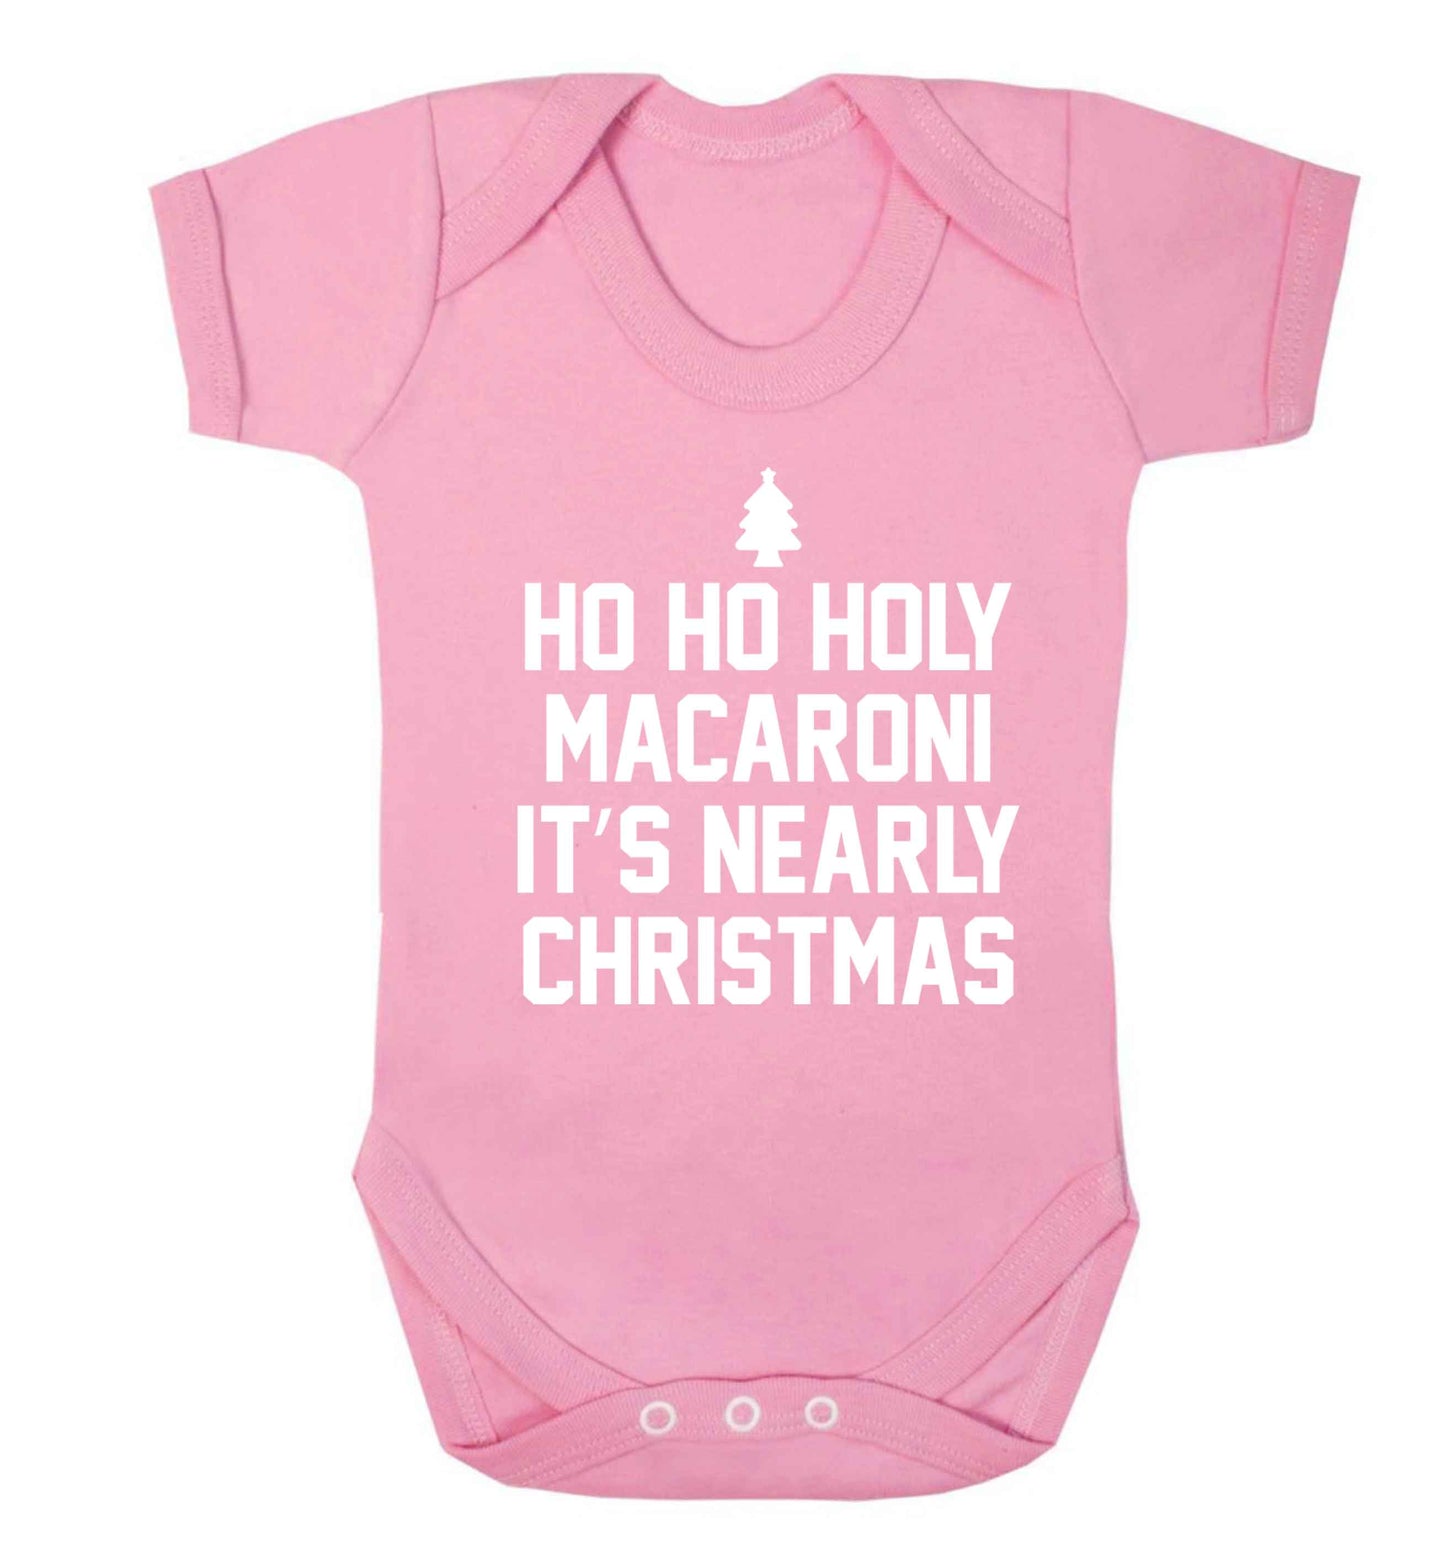 Ho ho holy macaroni it's nearly Christmas Baby Vest pale pink 18-24 months